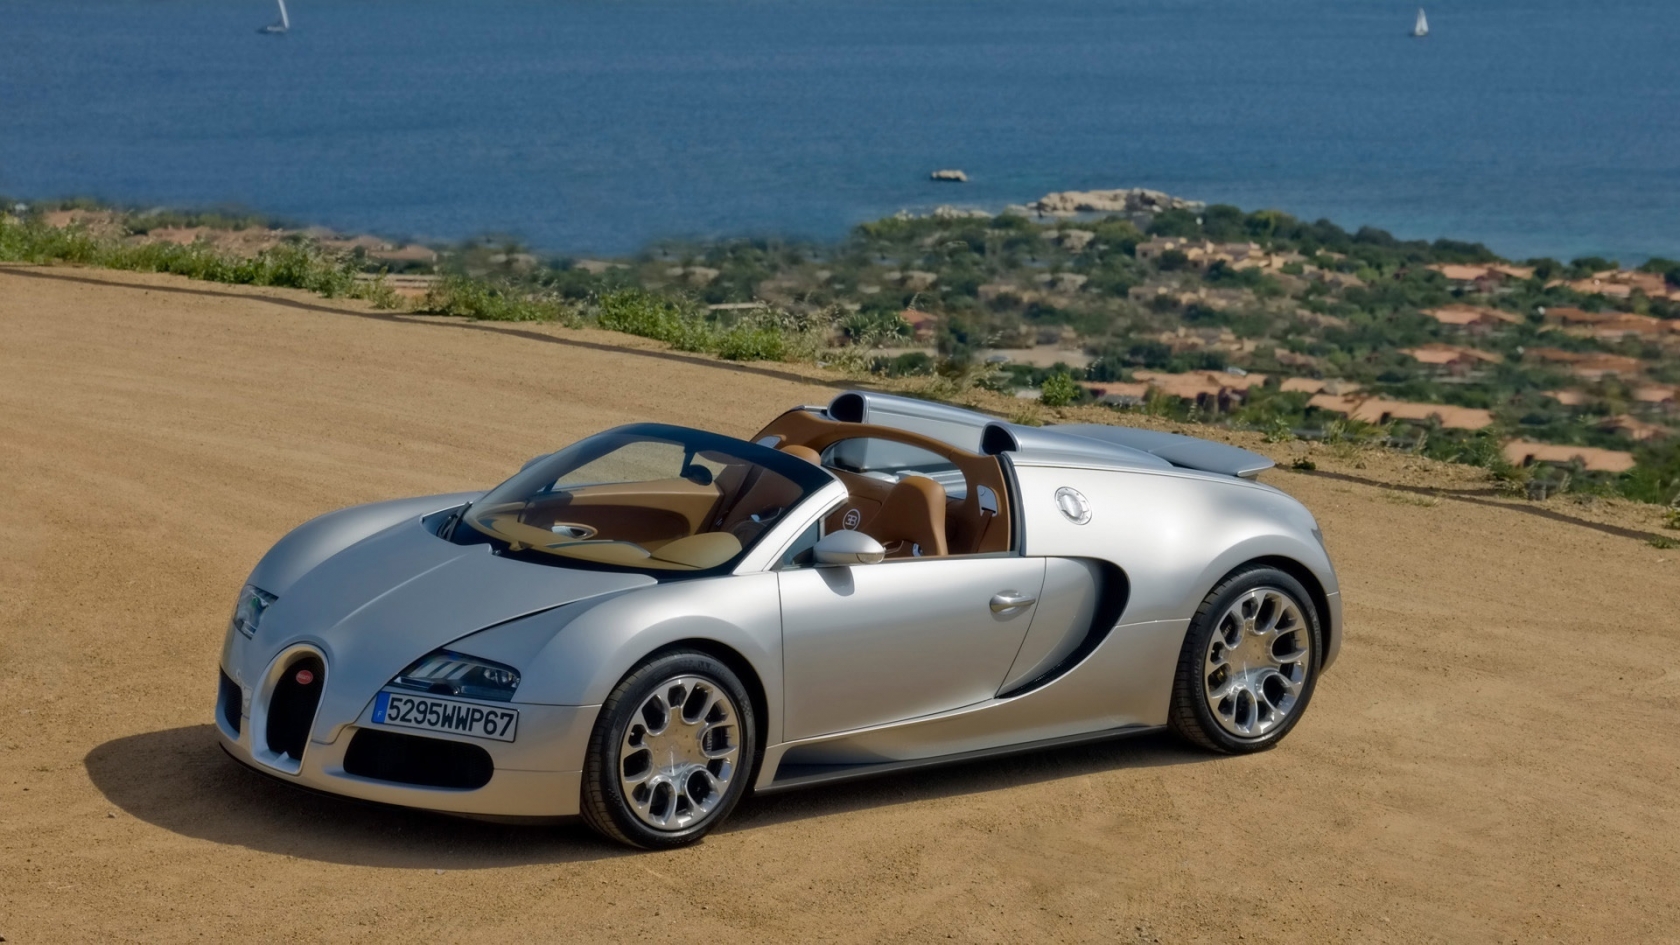 Bugatti Veyron 16.4 Grand Sport 2010 in Sardinia - Front And Side Panorama for 1680 x 945 HDTV resolution